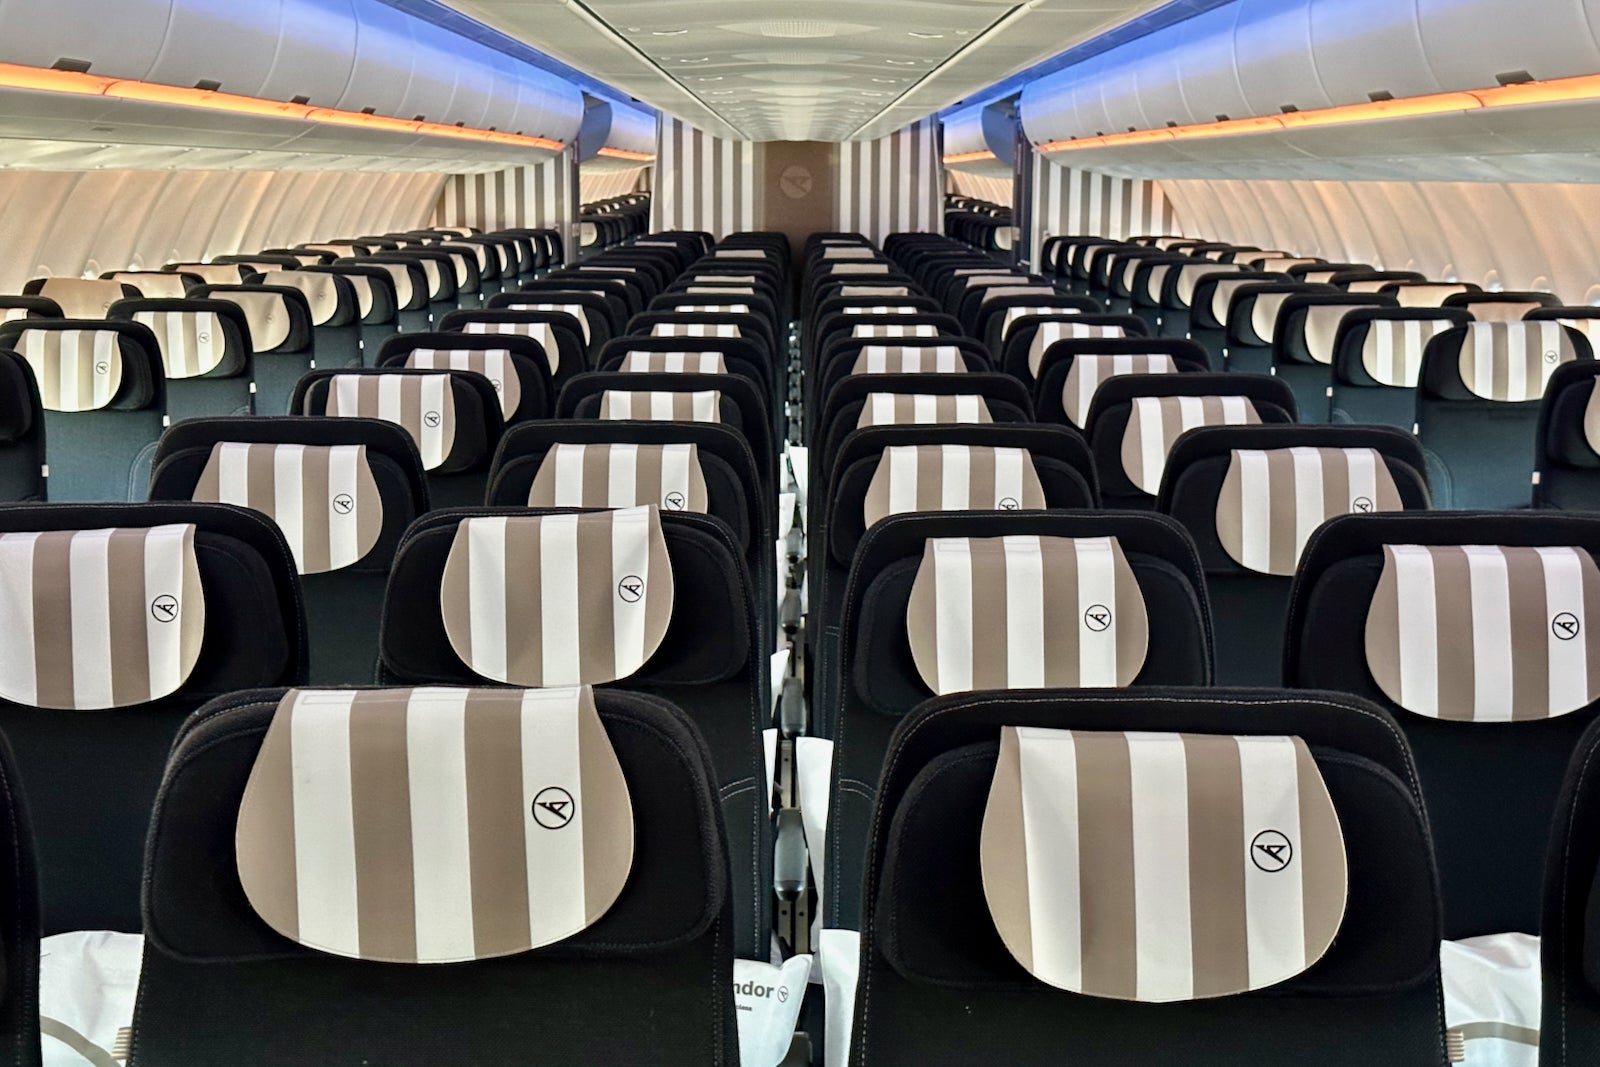 Condor 767 Business Class Review I One Mile At A Time